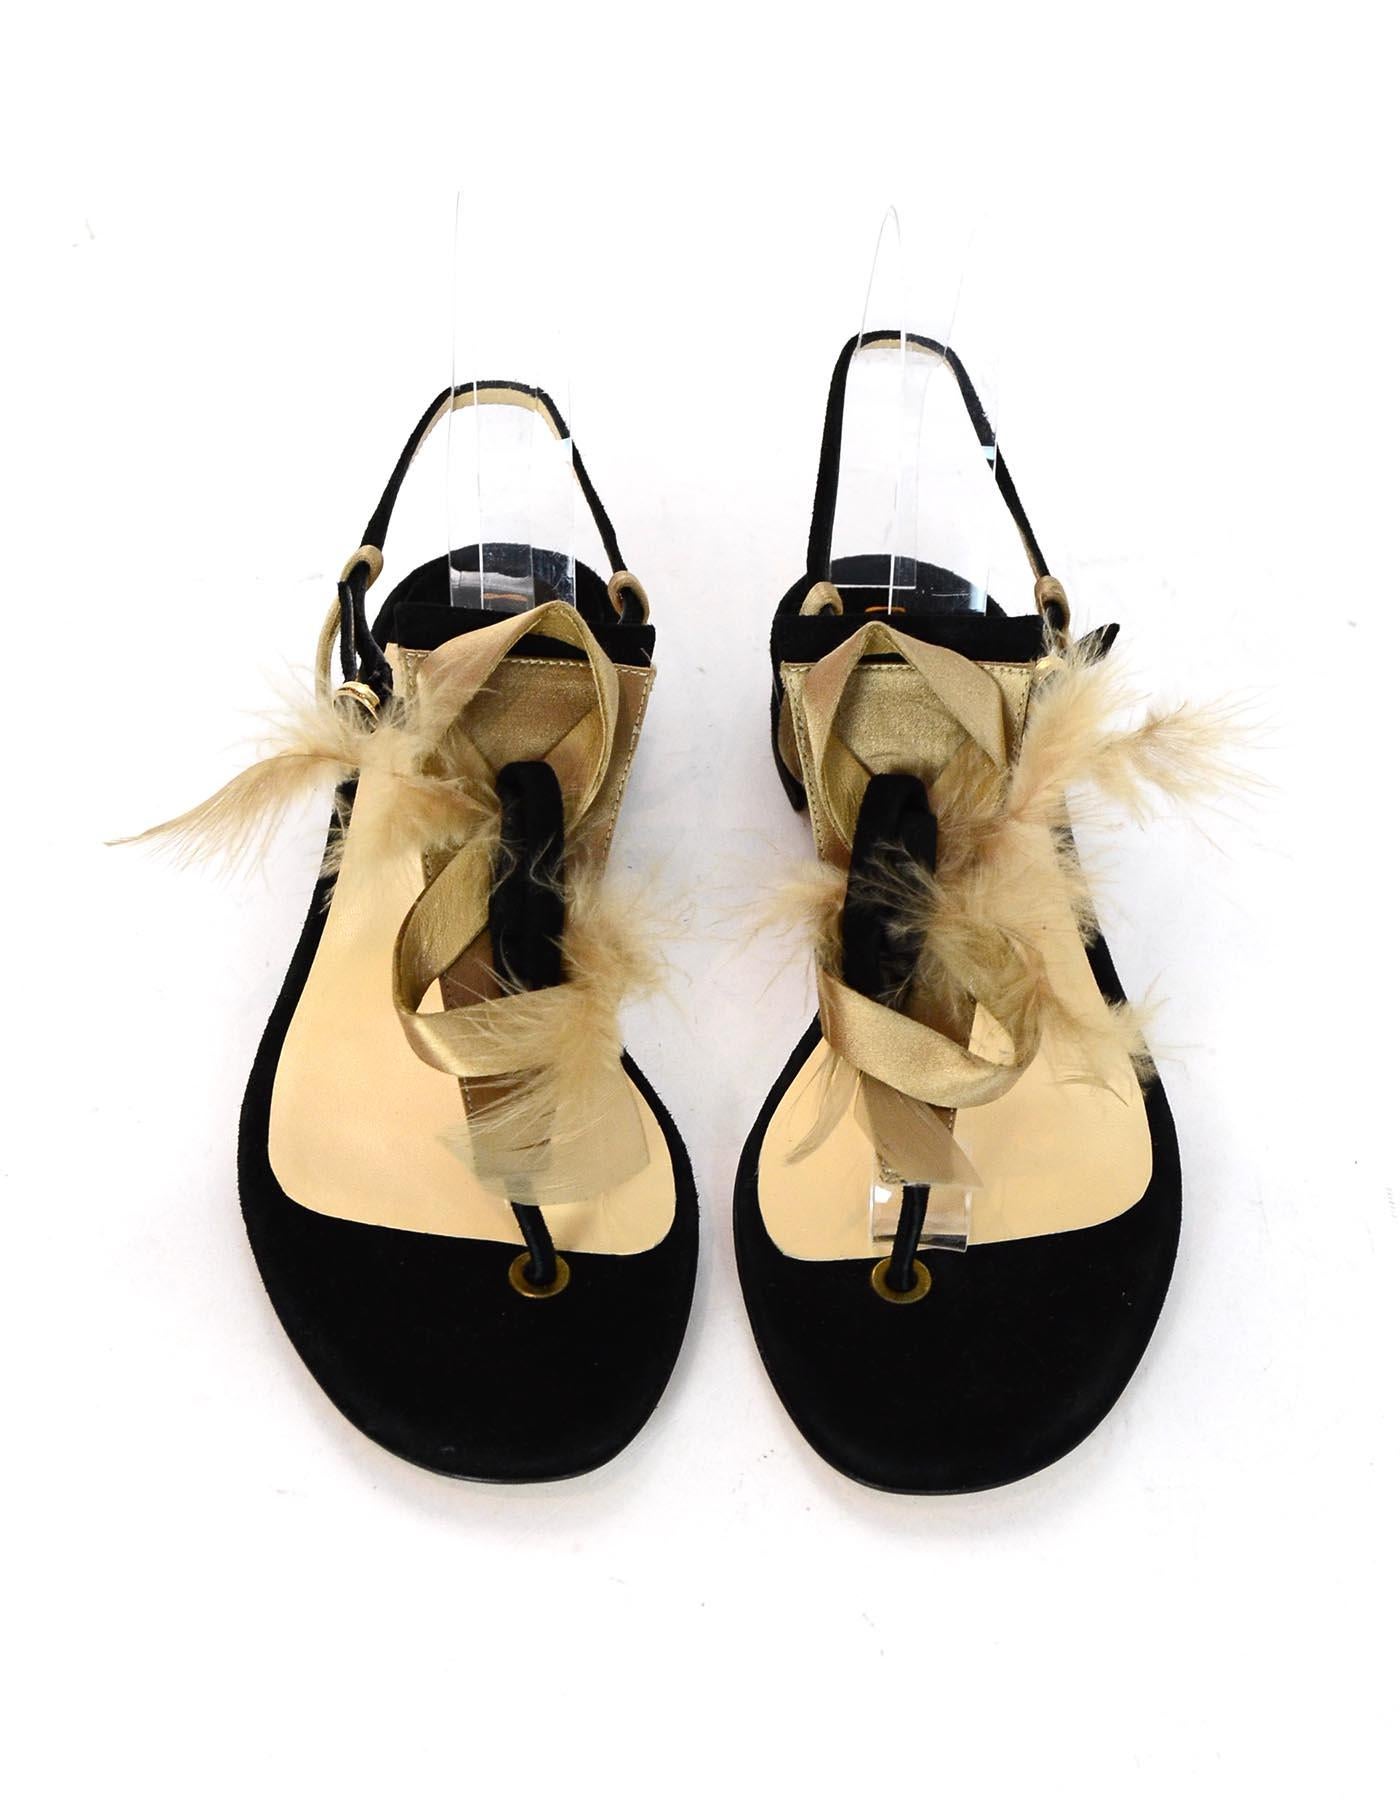 Jour Black Suede Sandals W/ Feather Detail Sz 38

Made In: Italy
Color: Black/tan
Hardware: Goldtone
Materials: Suede and feather
Closure/Opening: Goldtone buckle strap
Overall Condition: Excellent like new condition 
Estimated Retail: $675 +